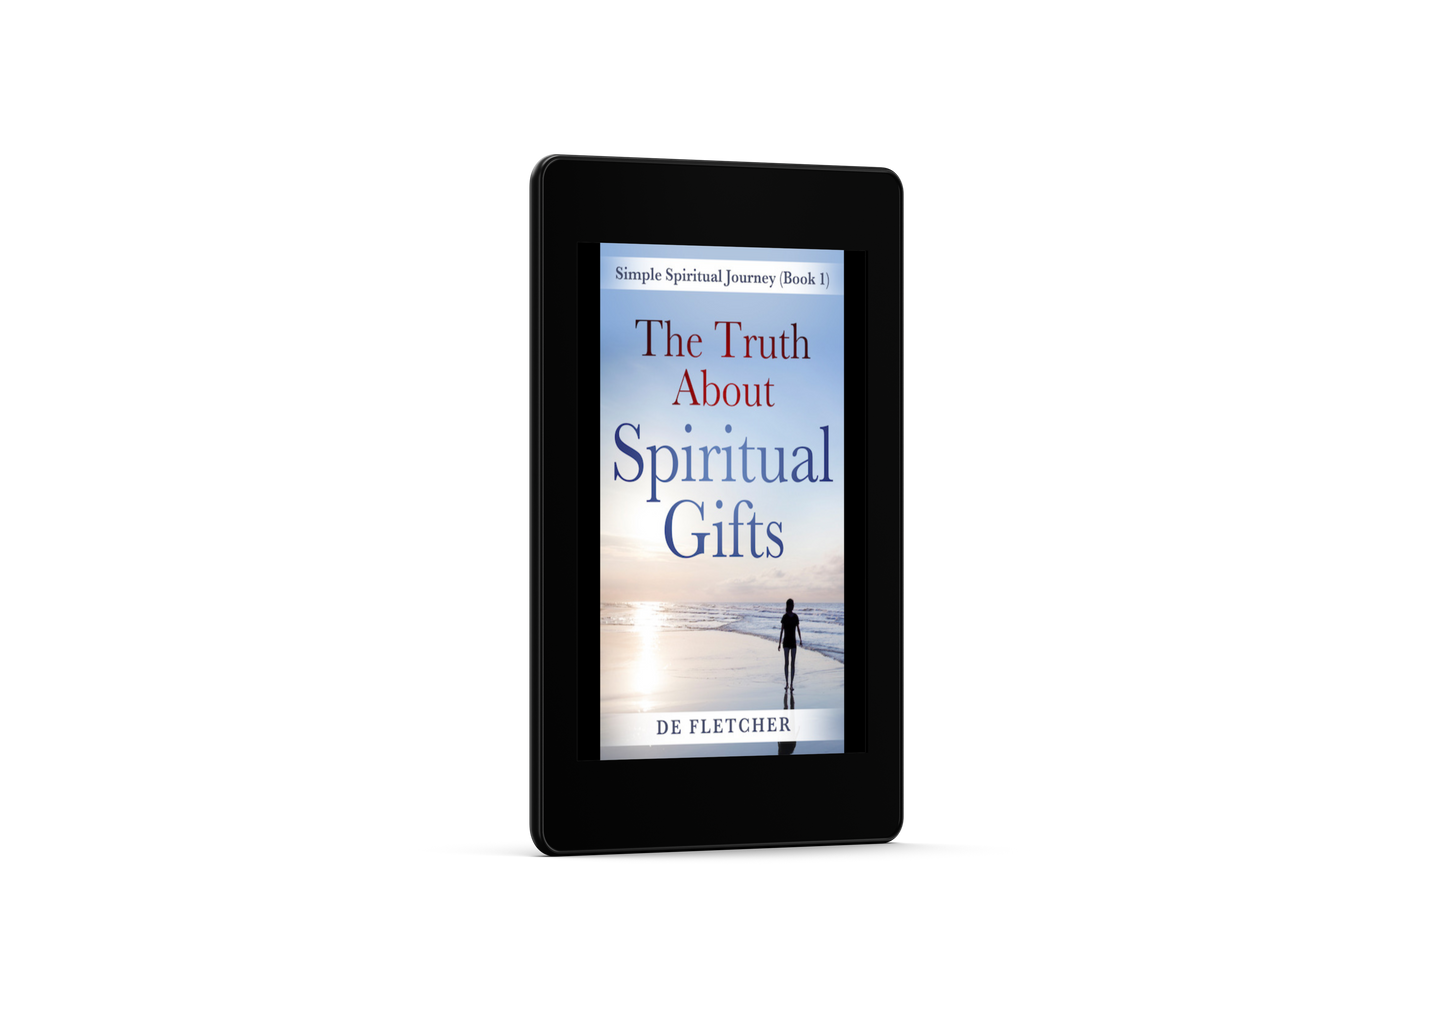 An Ebook photo of The Truth About Spiritual Gifts". Woman walking along the beach at sunset.